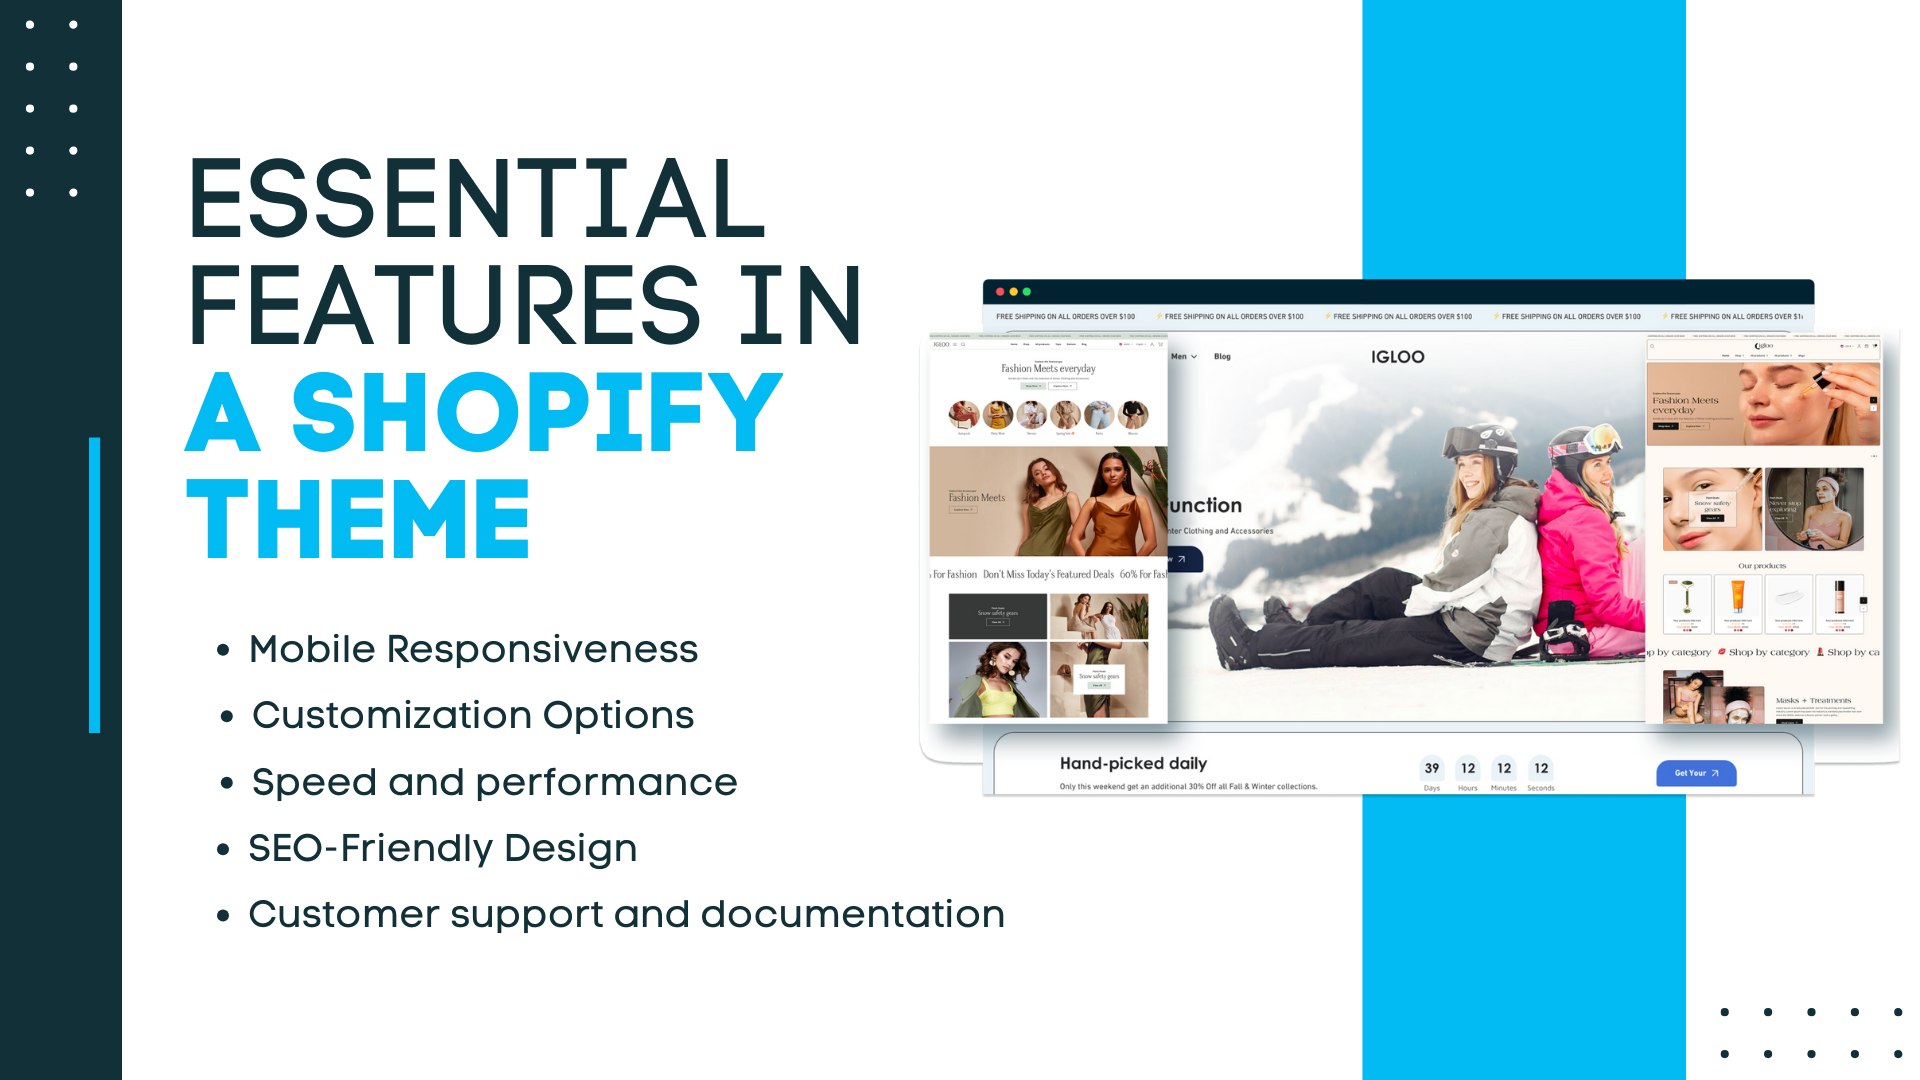 Essential Features in a Shopify Theme